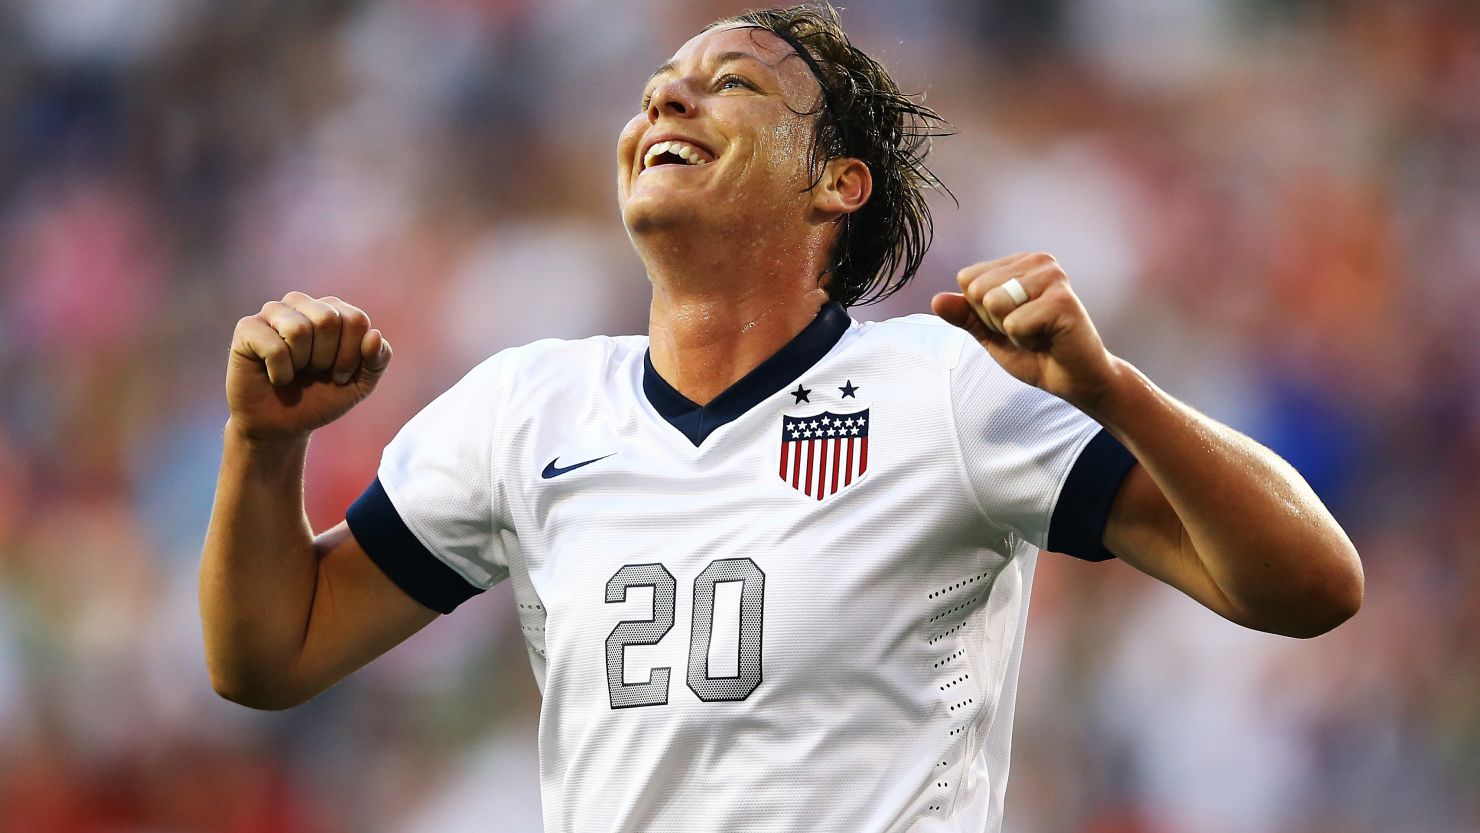 Striker Abby Wambach has scored 160 goals in 207 appearances for the United States.